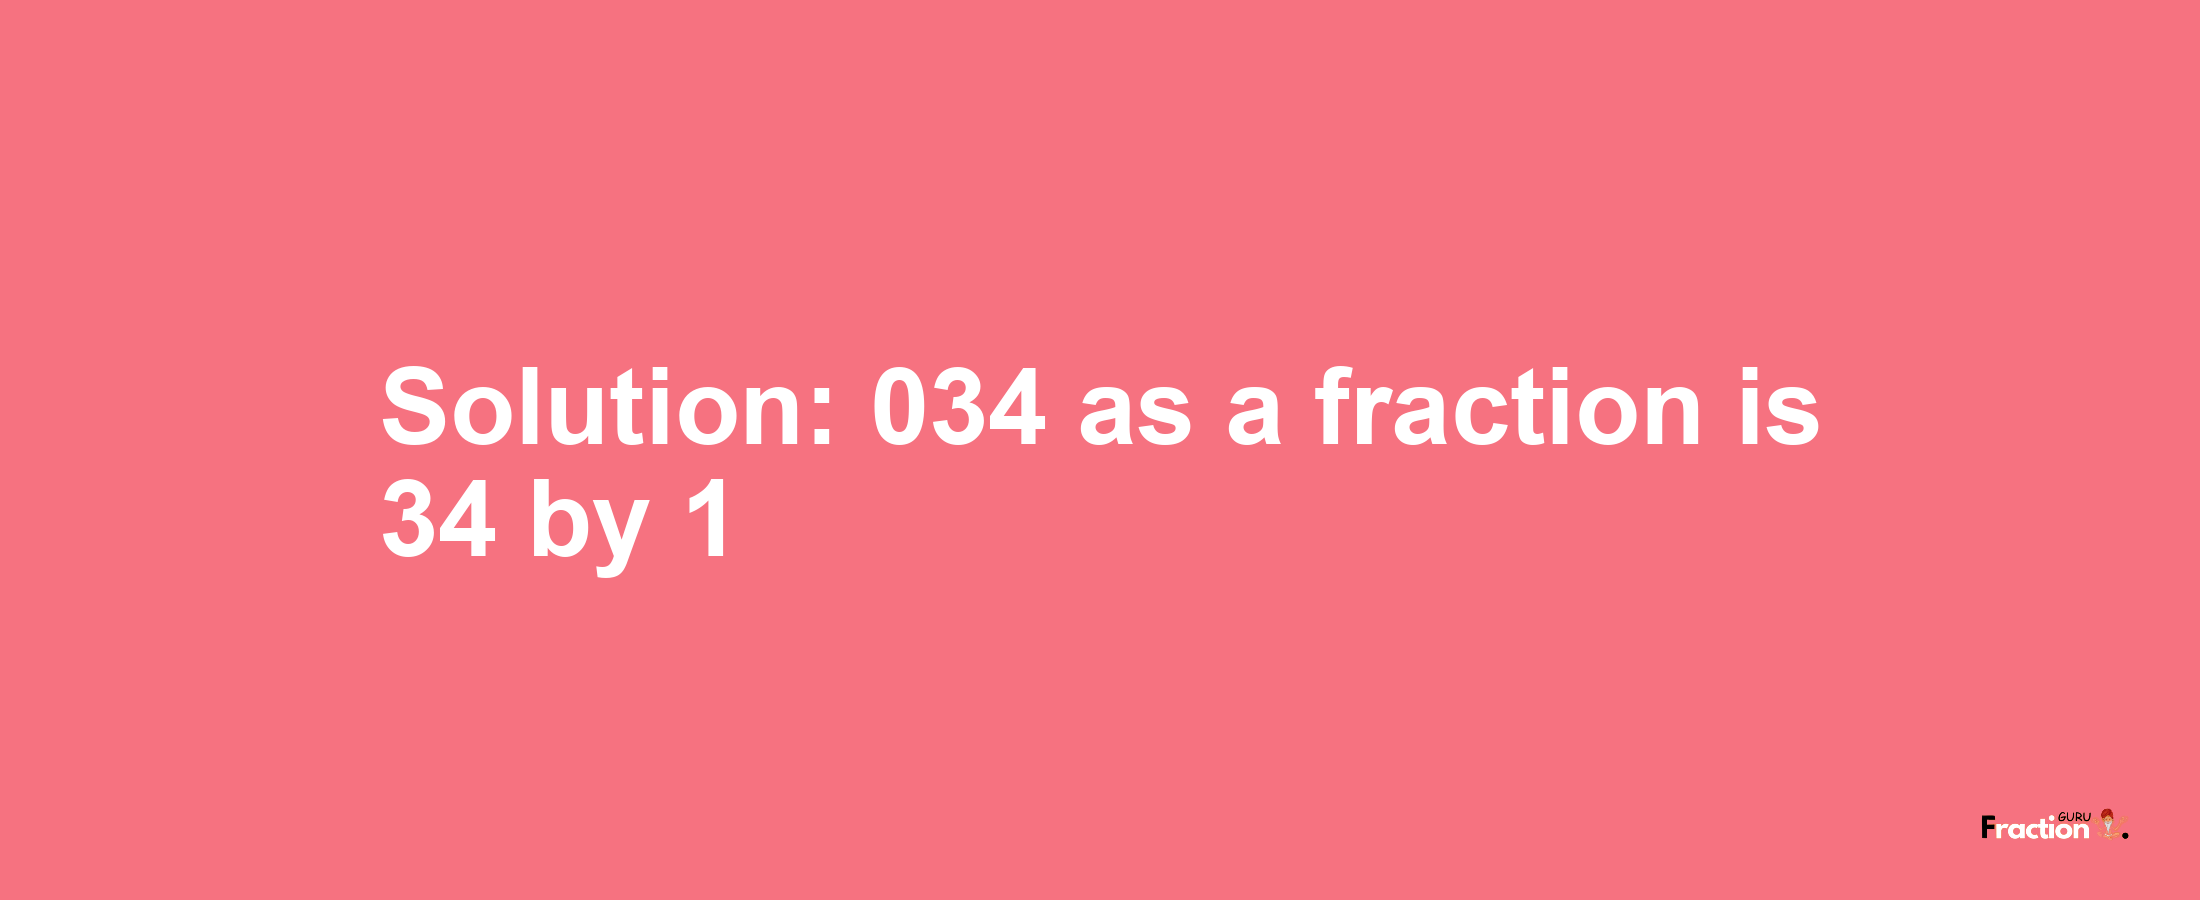 Solution:034 as a fraction is 34/1